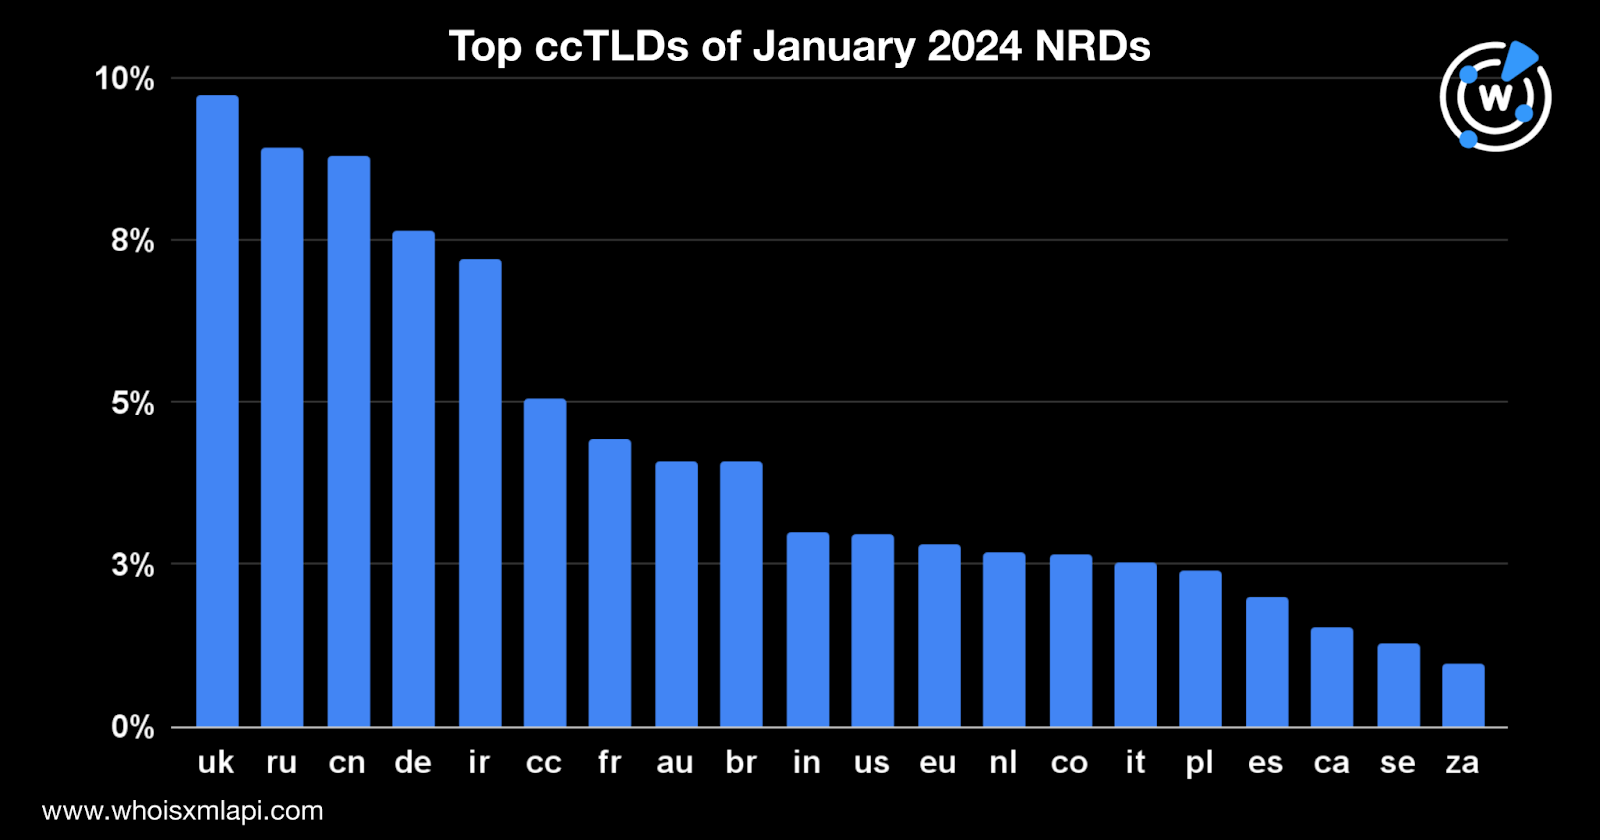 Top ccTLDs of January 2024 NRDs